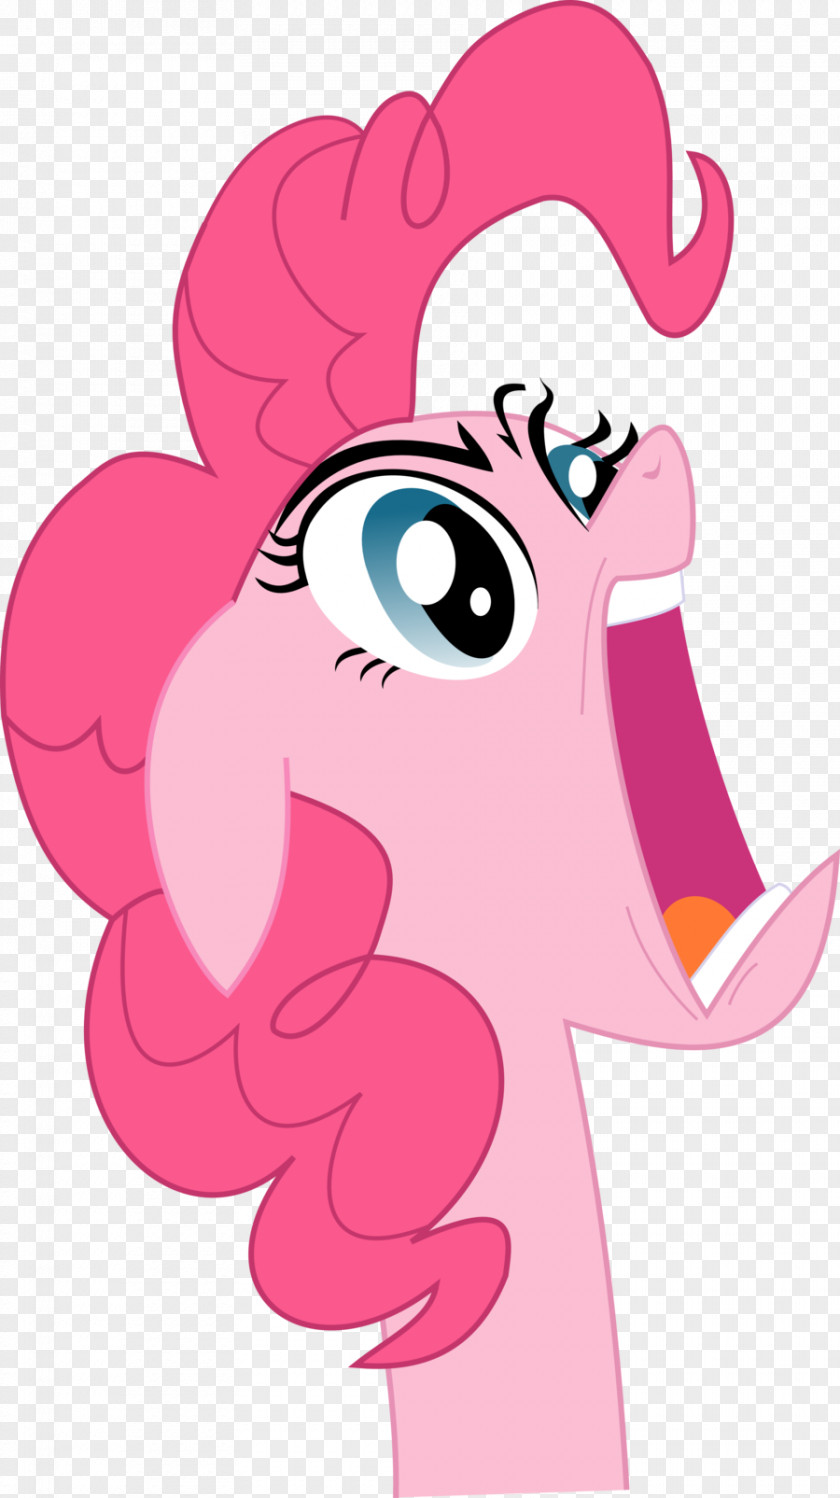 Bloom Vector Pinkie Pie Twilight Sparkle Rarity My Little Pony PNG